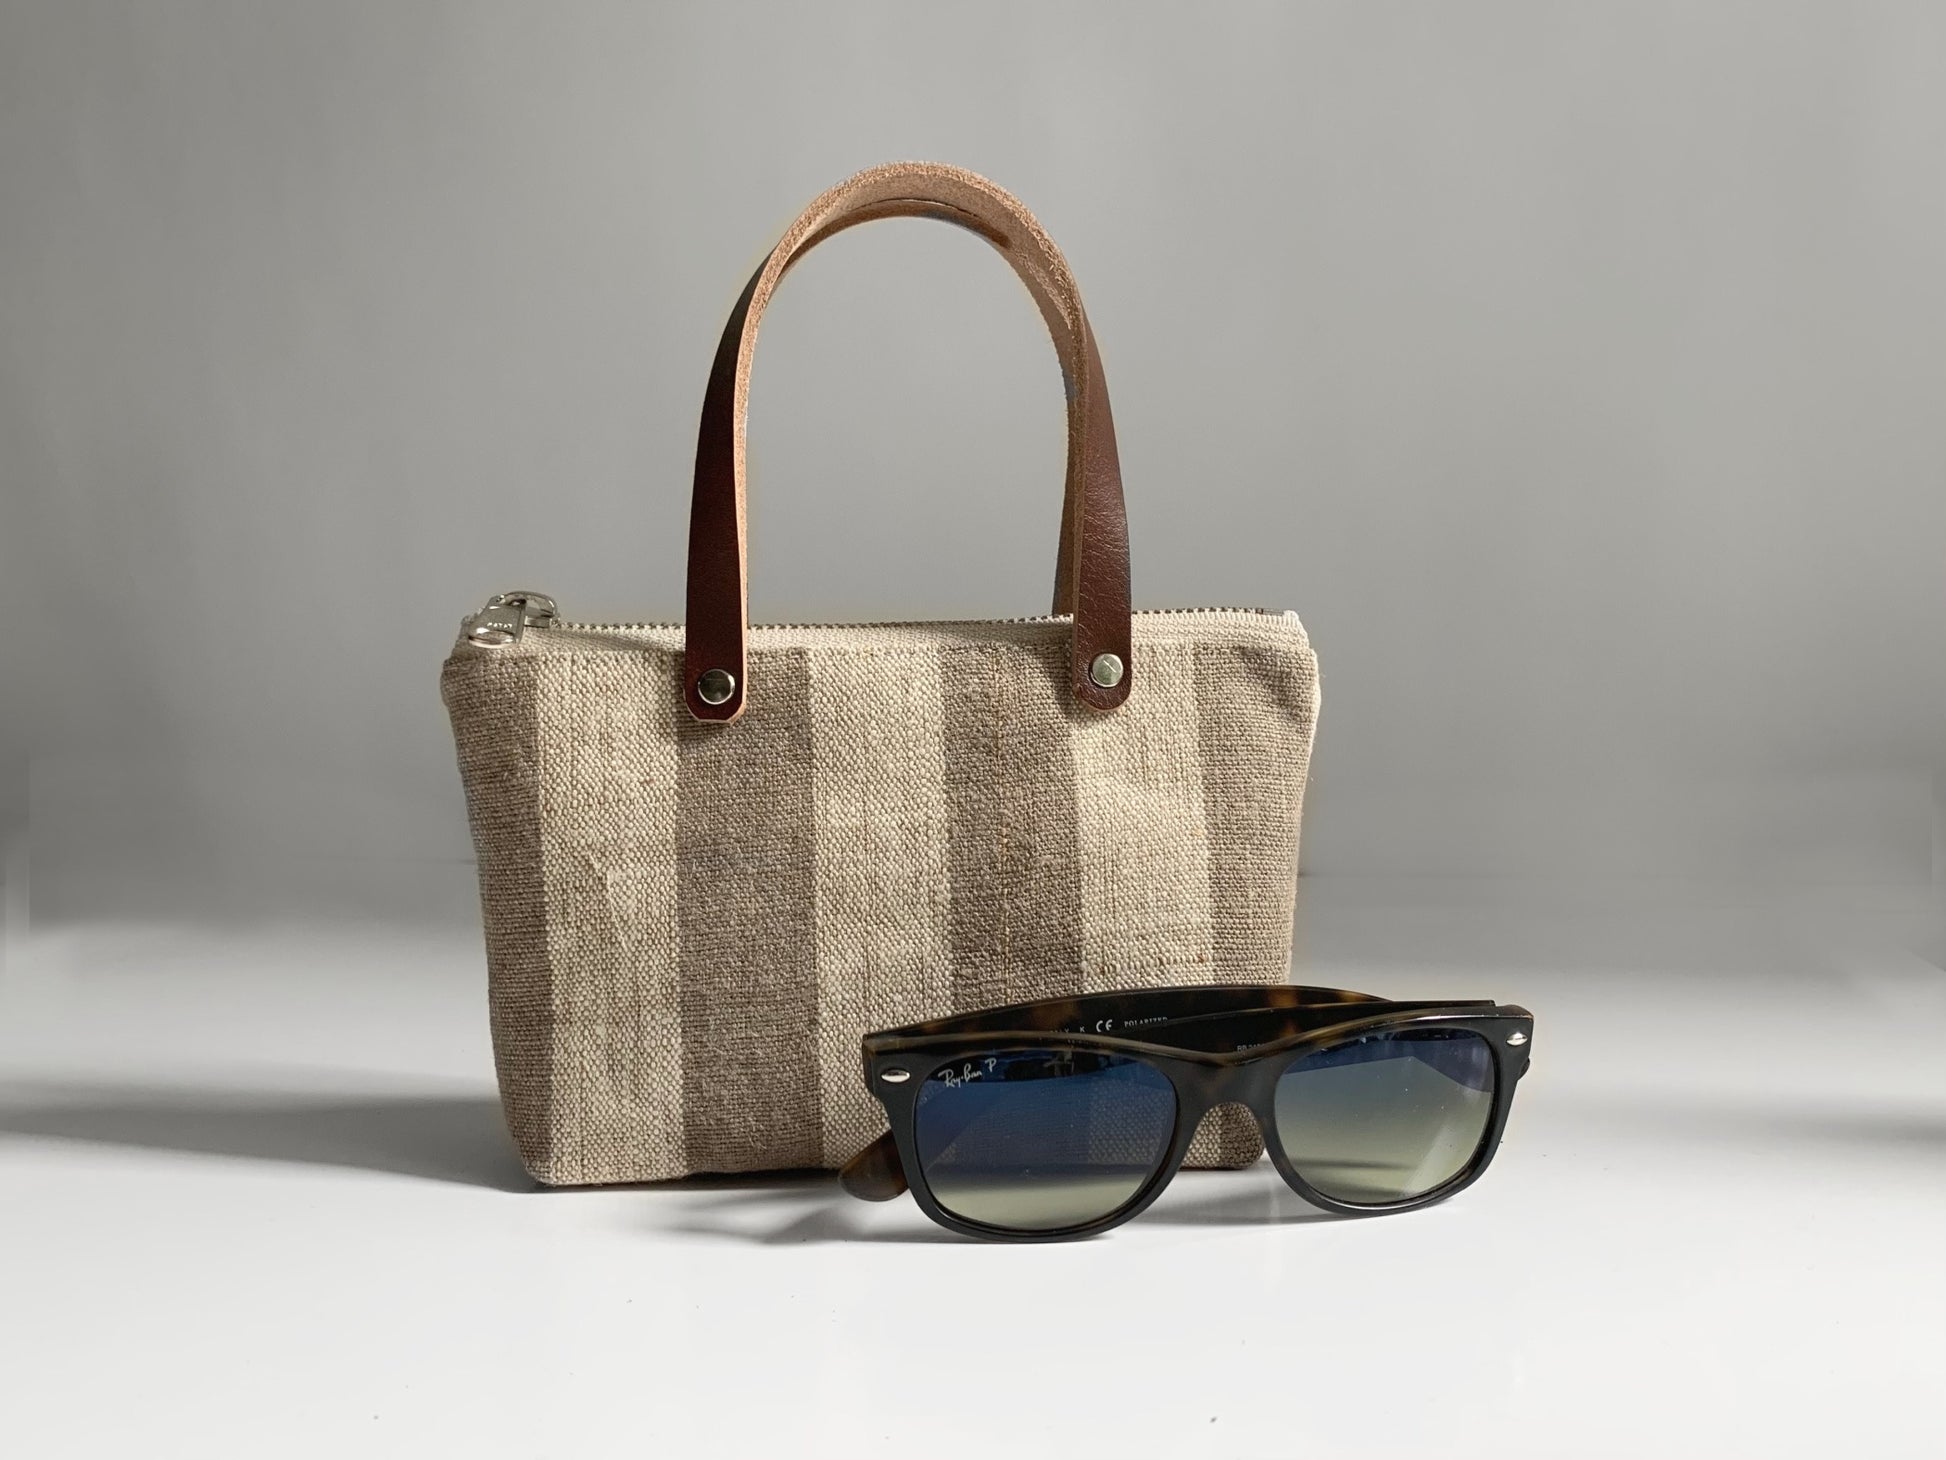 micro tote bag with sunglasses